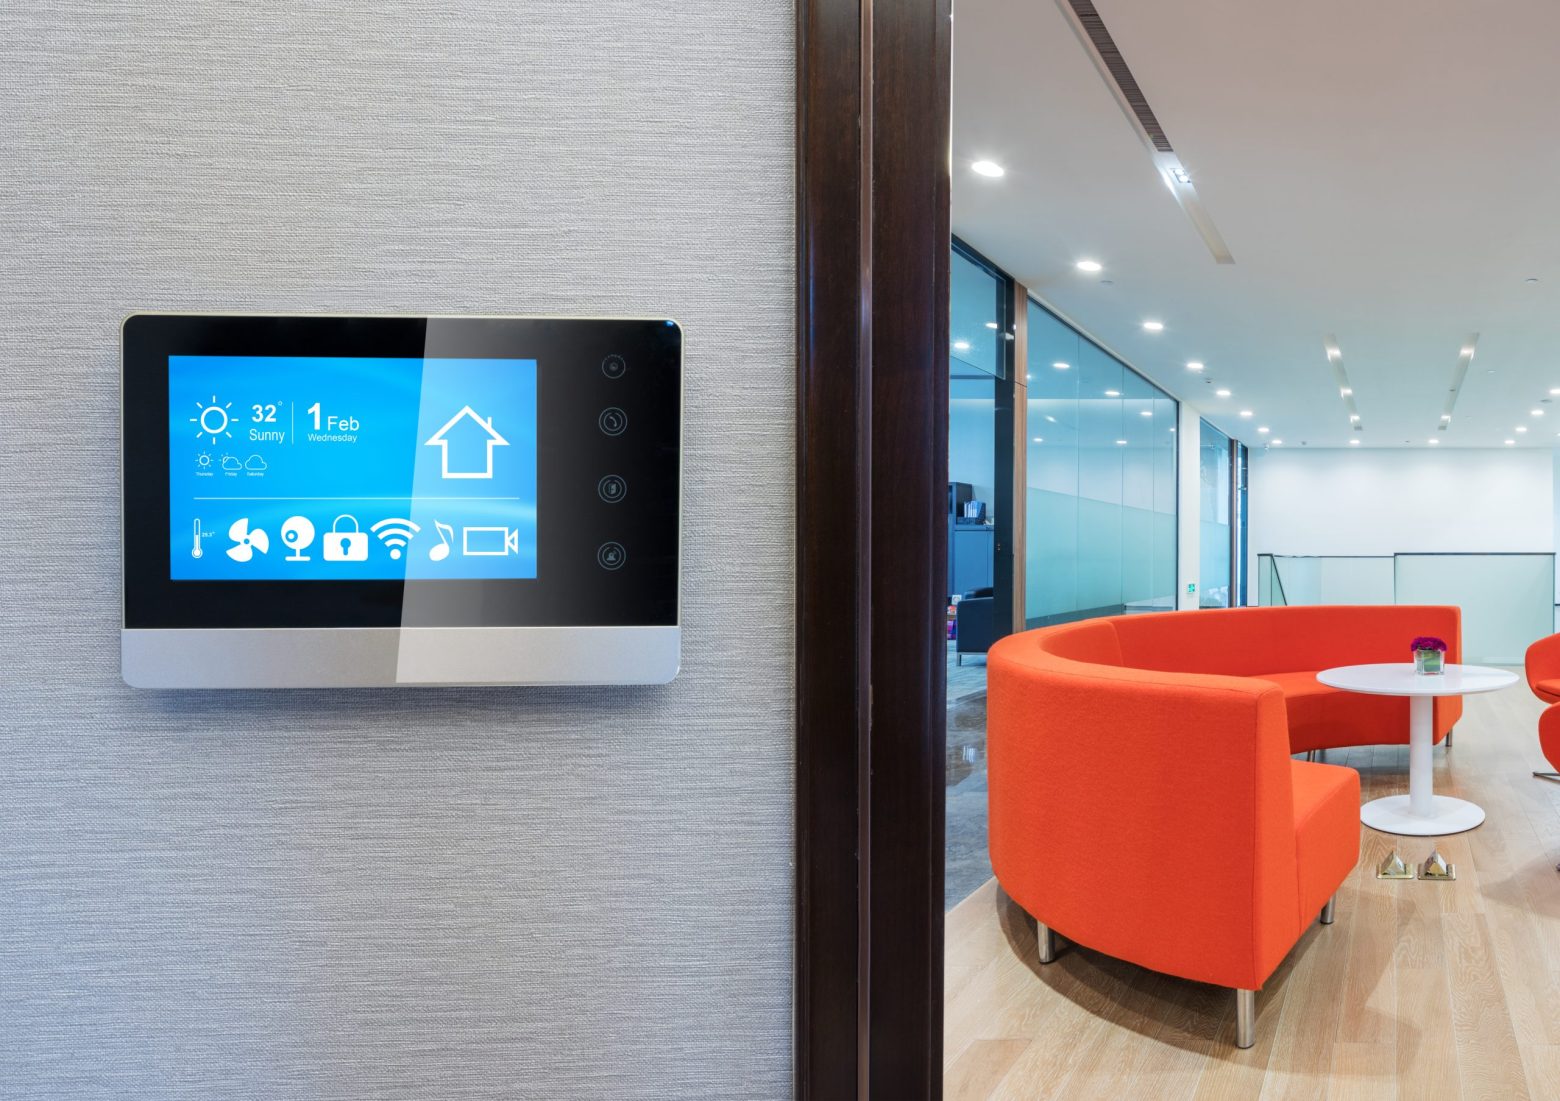 MJ Flood Security's Smart Home with NXP